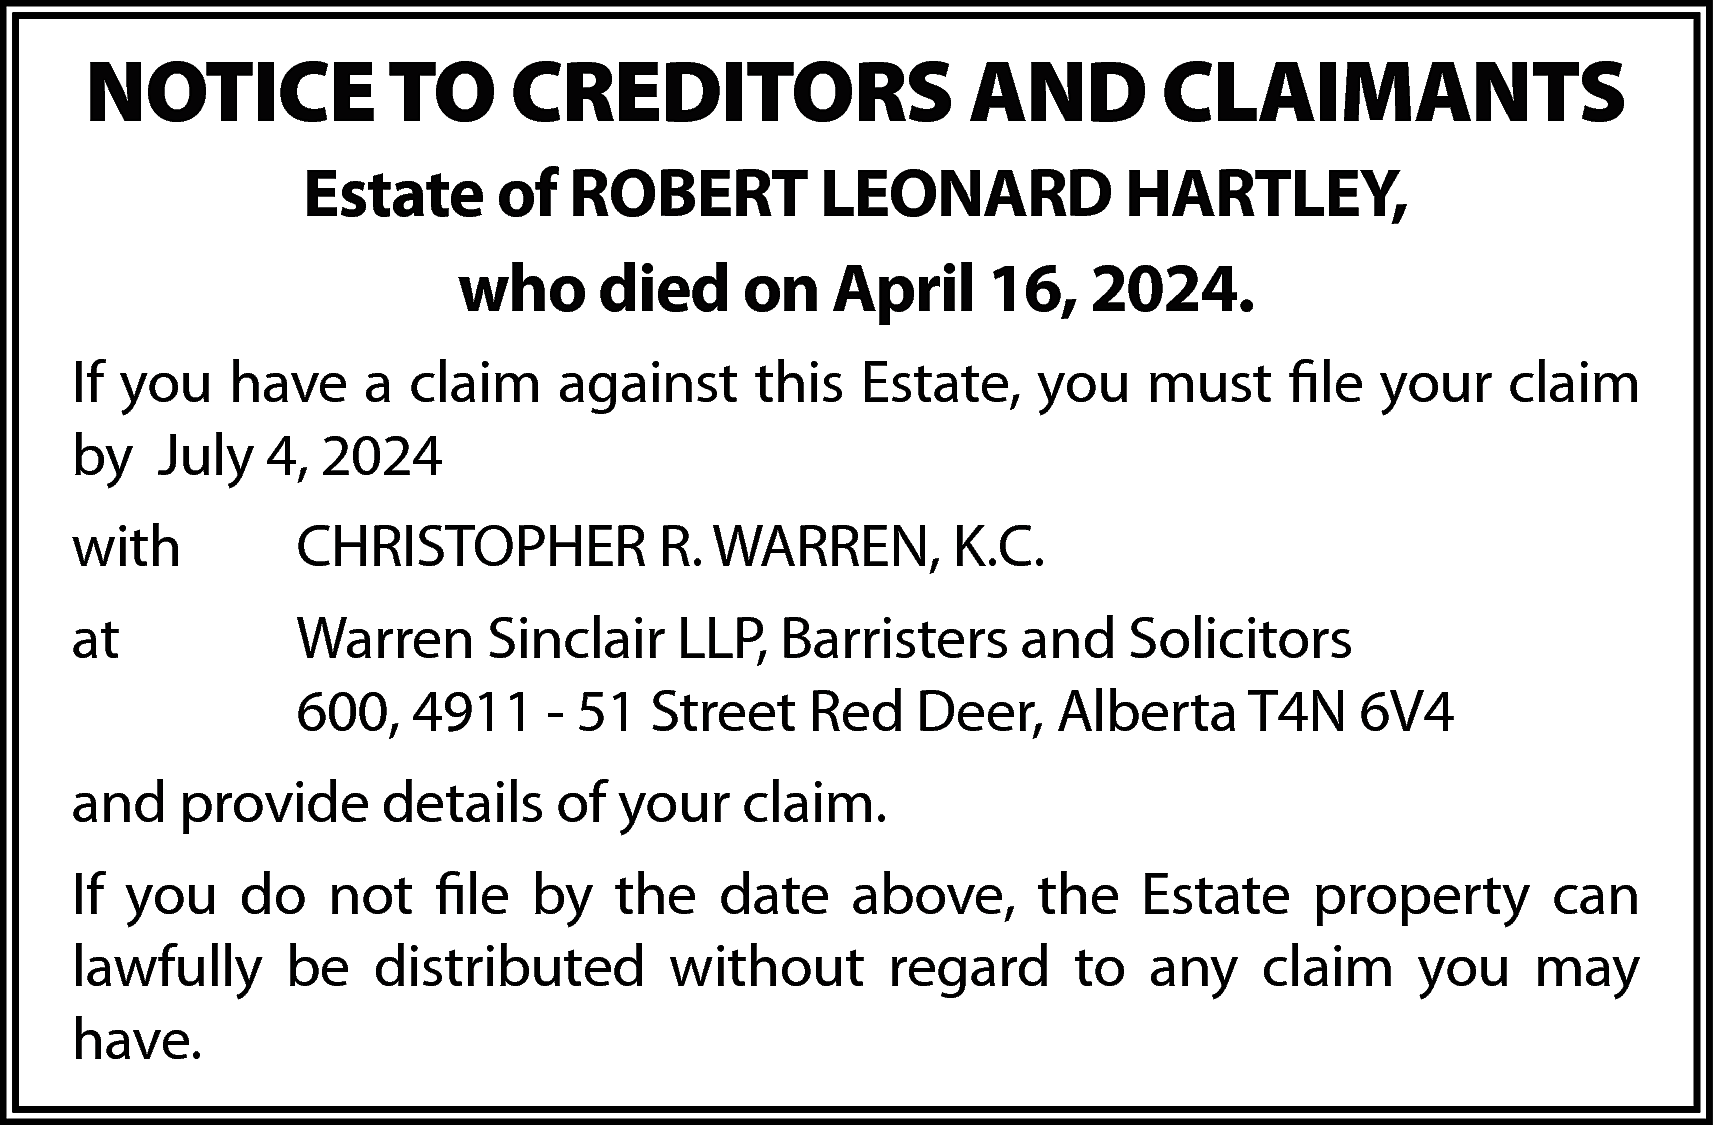 NOTICE TO CREDITORS AND CLAIMANTS  NOTICE TO CREDITORS AND CLAIMANTS  Estate of ROBERT LEONARD HARTLEY,  who died on April 16, 2024.  If you have a claim against this Estate, you must file your claim  by July 4, 2024  with    CHRISTOPHER R. WARREN, K.C.    at    Warren Sinclair LLP, Barristers and Solicitors  600, 4911 - 51 Street Red Deer, Alberta T4N 6V4    and provide details of your claim.  If you do not file by the date above, the Estate property can  lawfully be distributed without regard to any claim you may  have.    